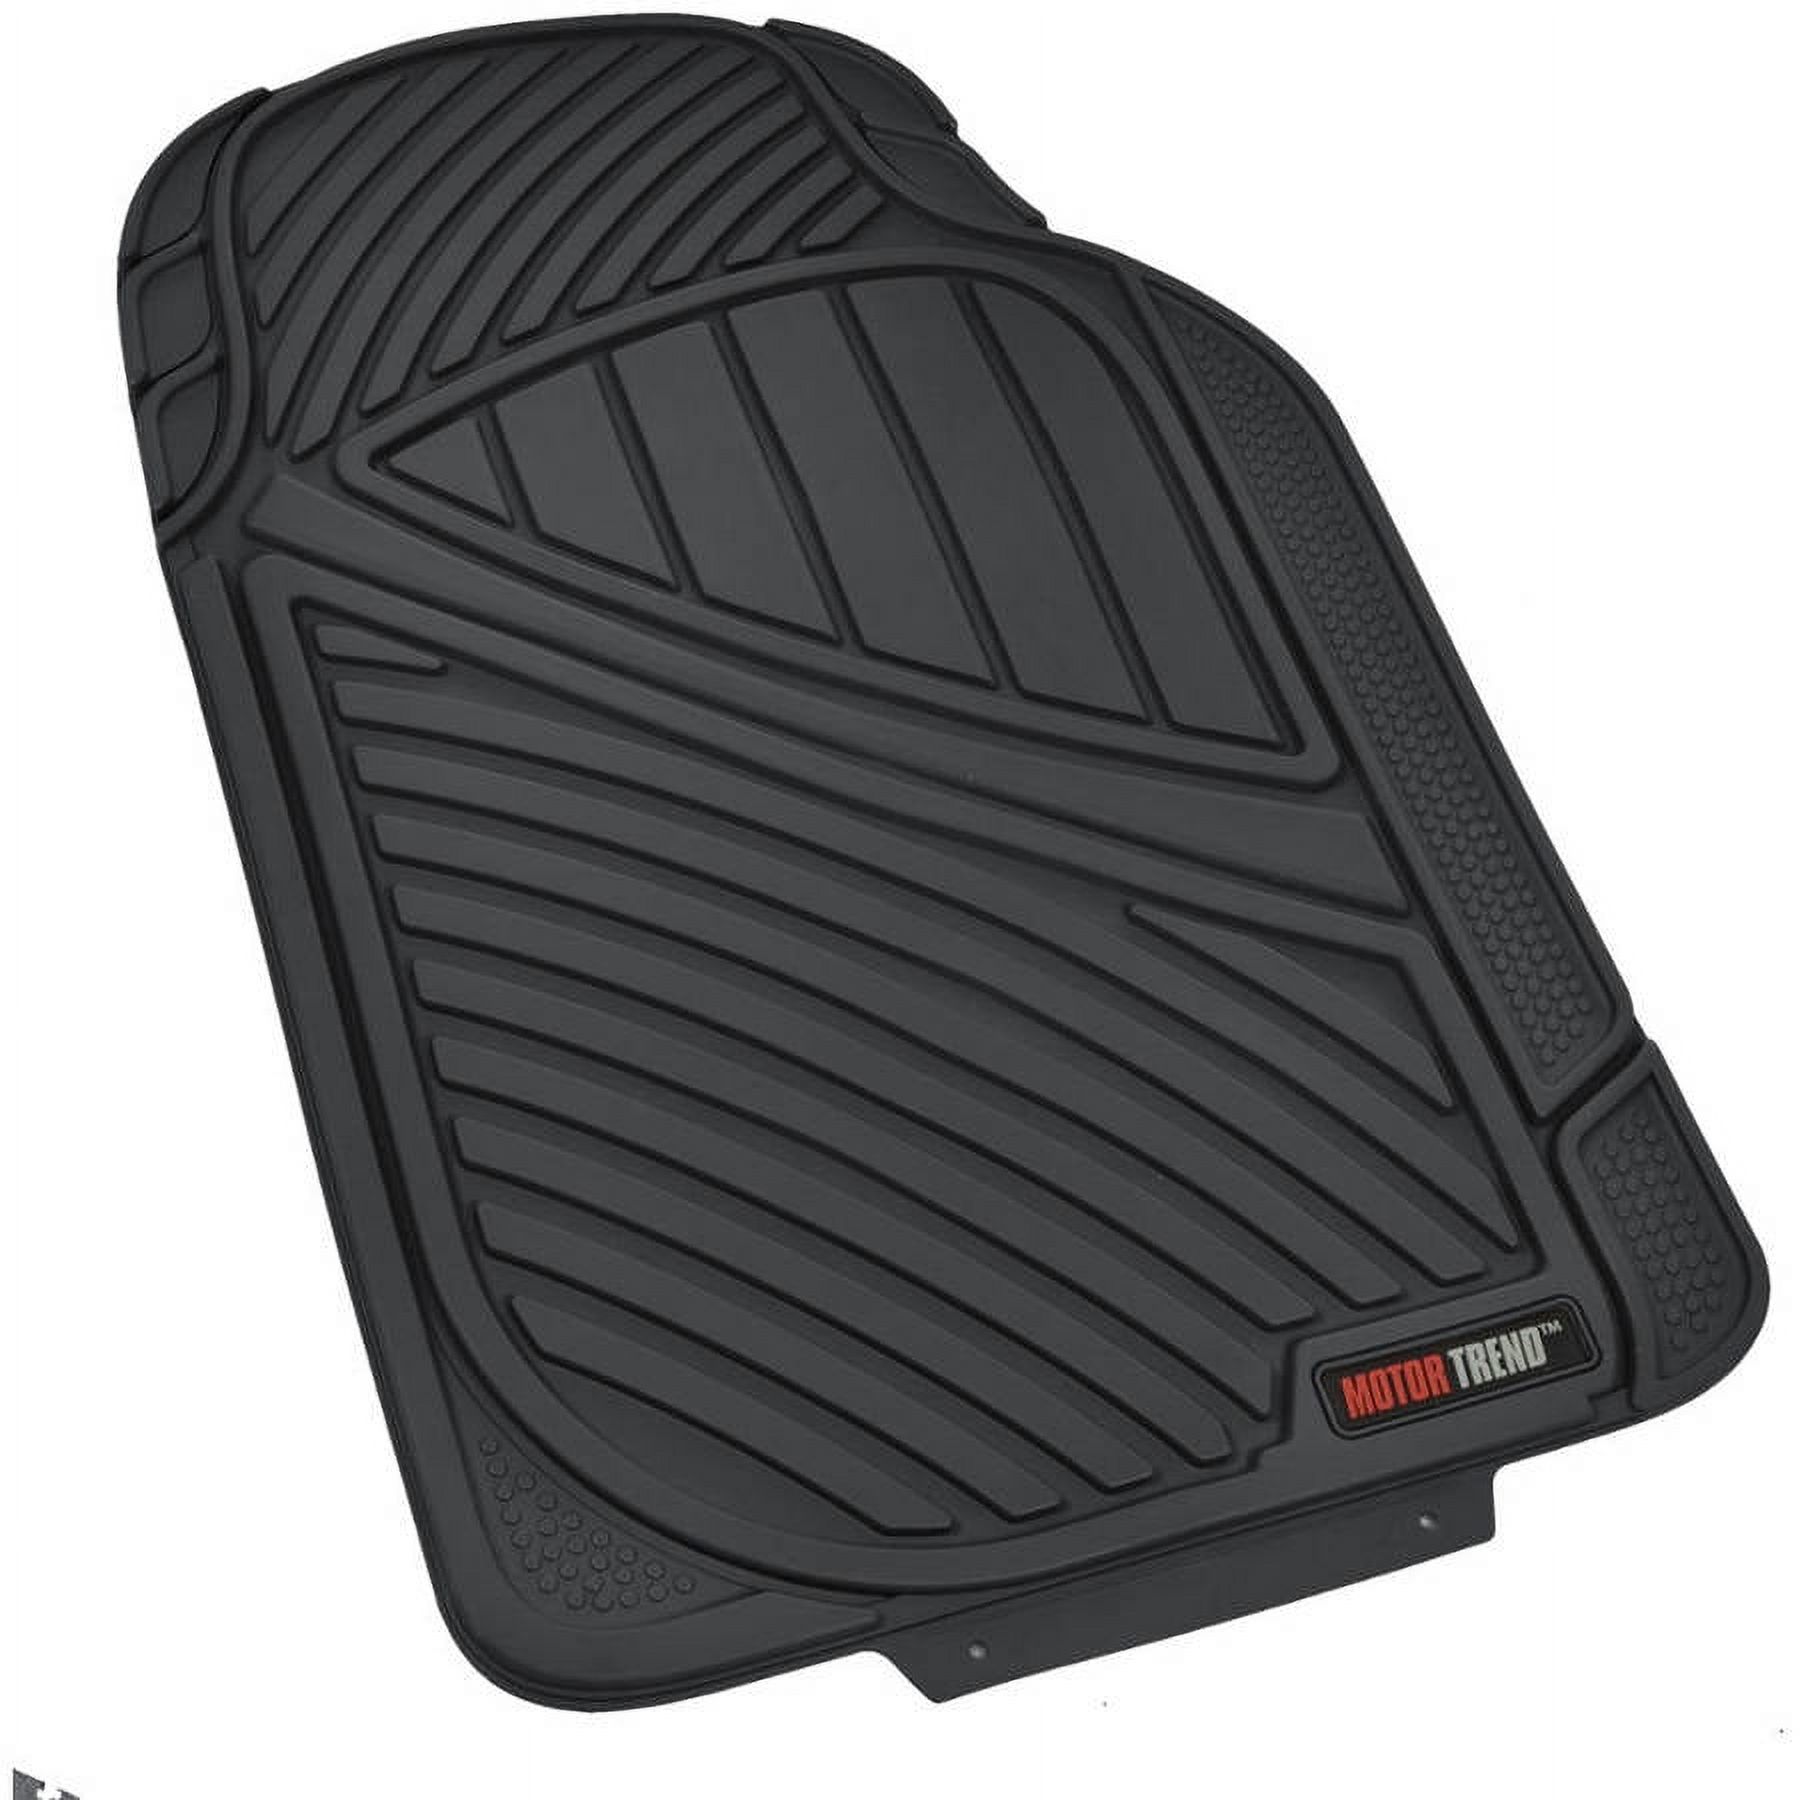 Motor Trend 100 Percent Odorless Car Floor Mats with Standard Trunk Cargo Mat, 4 Pieces Rubber Protection, Black Beige Gray - image 3 of 8